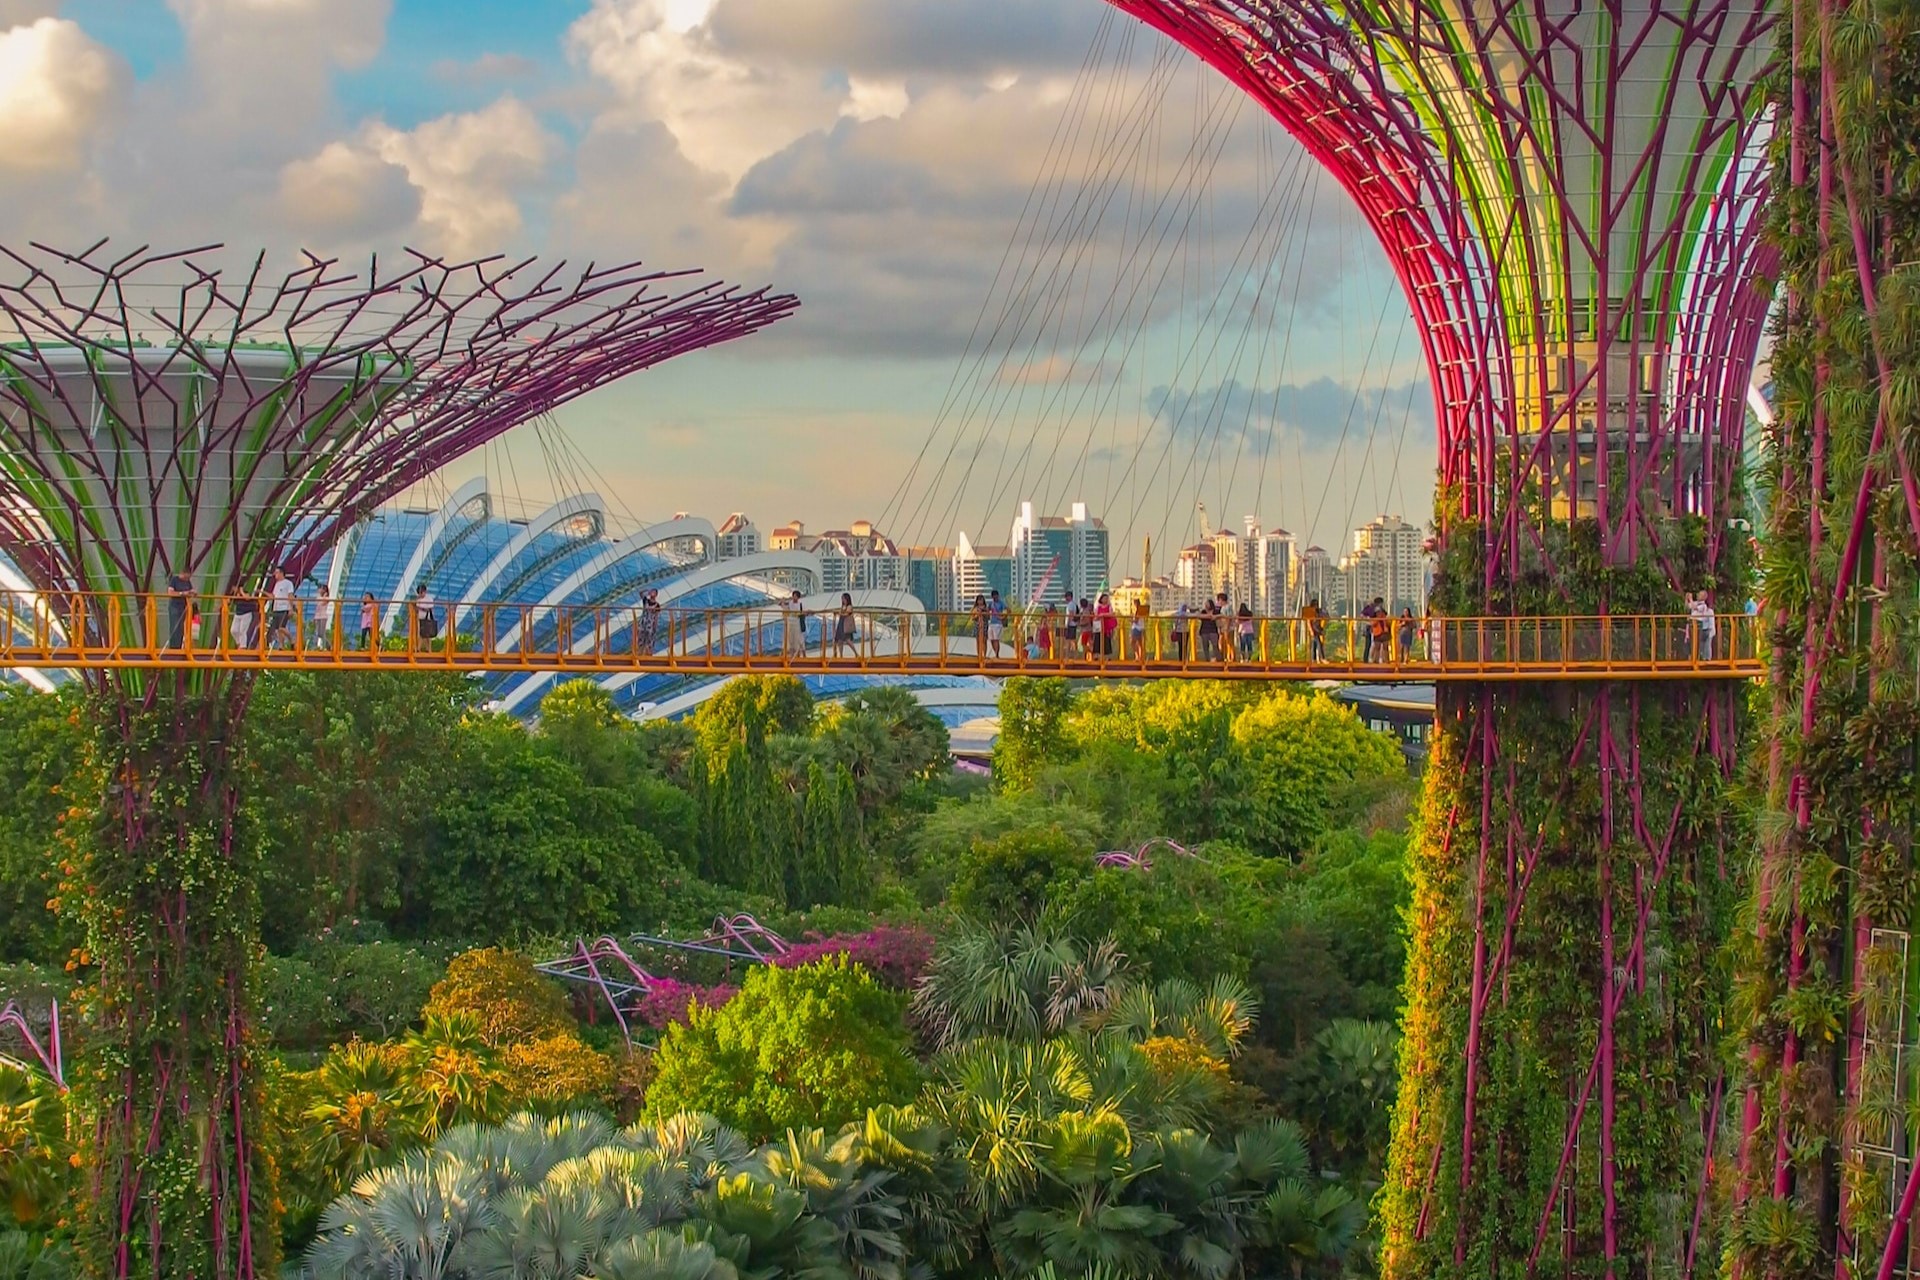 The Gardens By the Bay sustainable architecture.